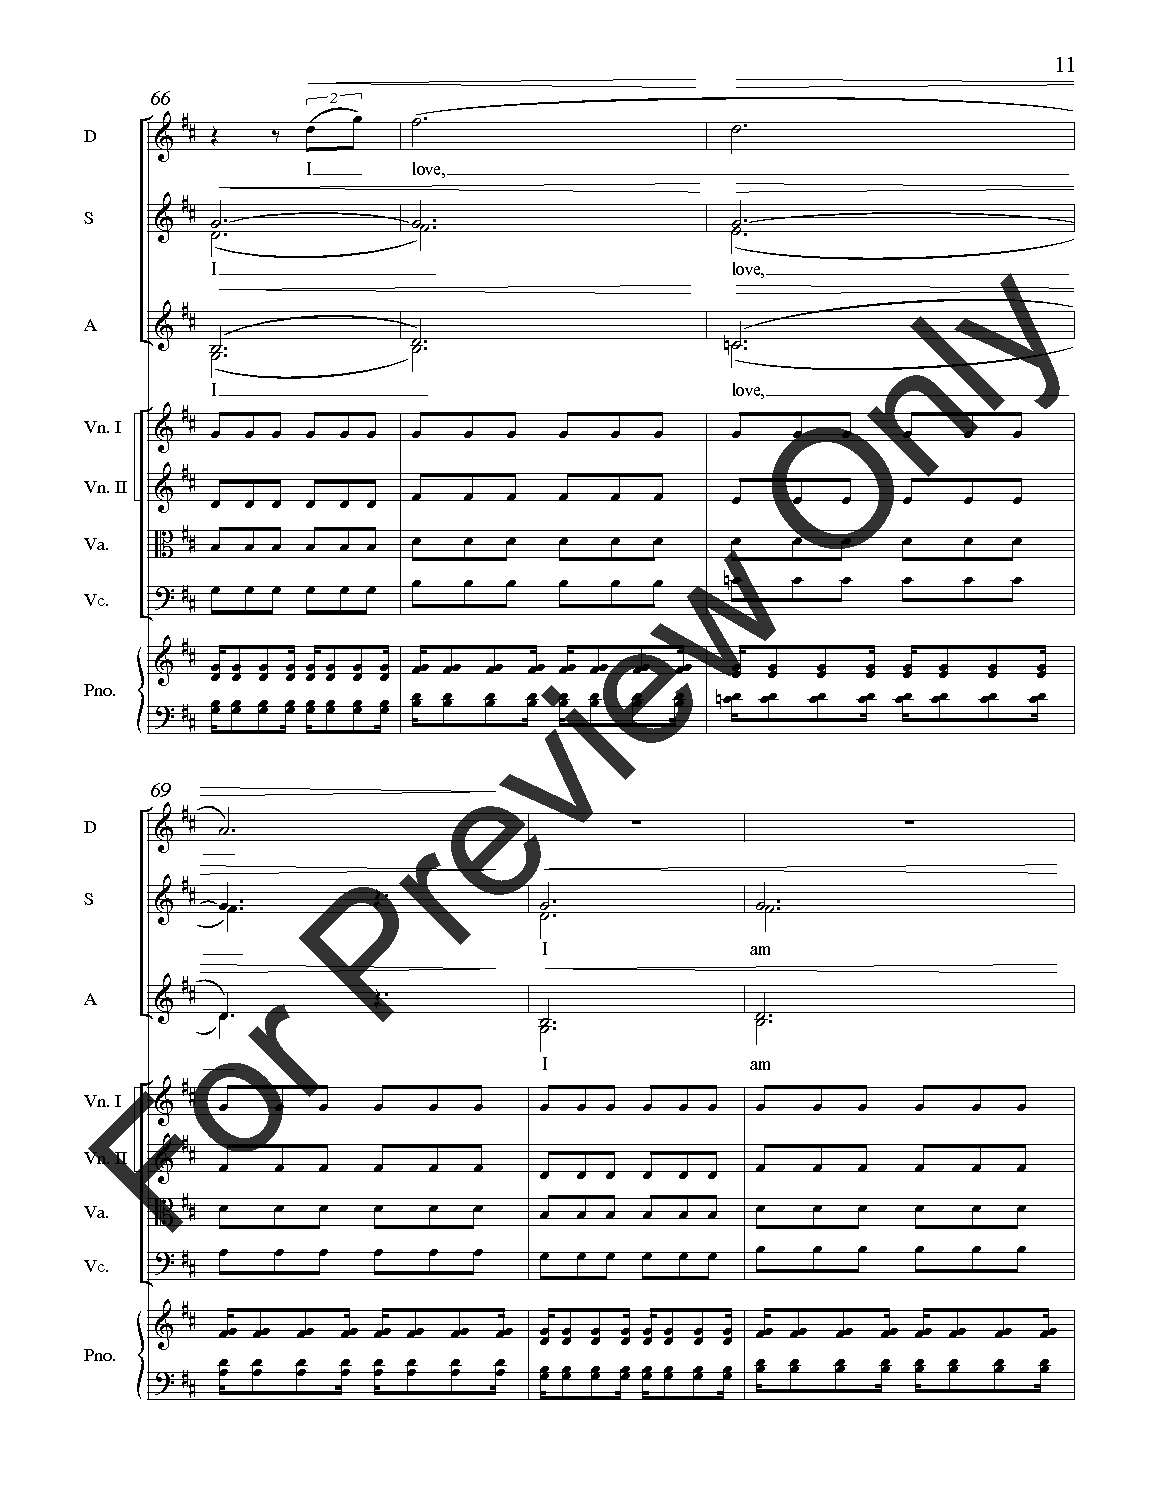 Joy from I Will Sing to the Stars Full Score